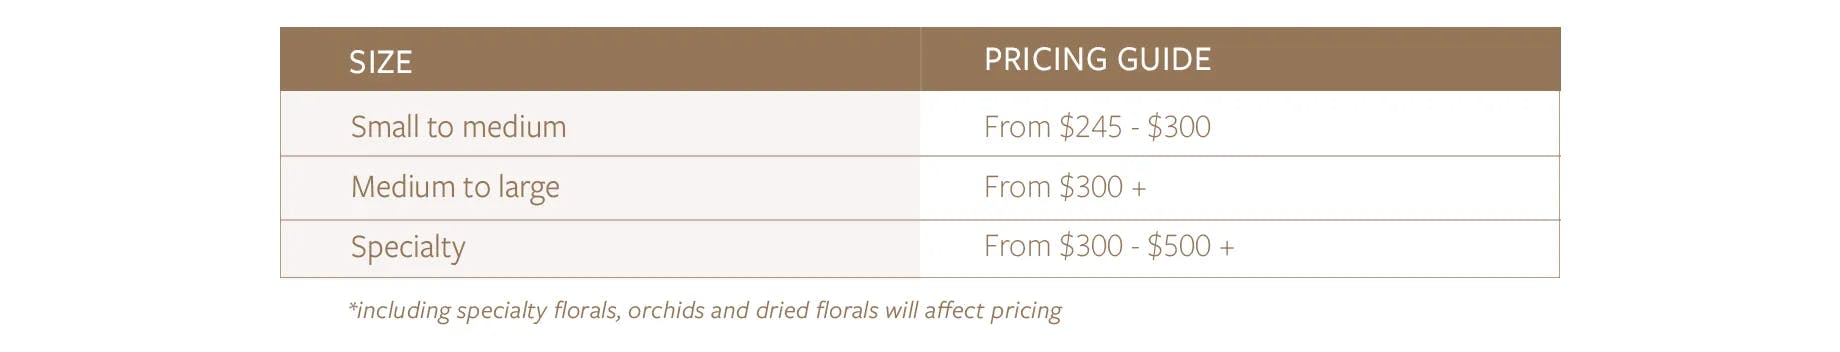 An image showing a pricing guide for floral arrangements categorized by size. "Small to medium" ranges from $245 to $300. "Medium to large" starts from $300+. "Specialty" ranges from $300 to $500+. A note indicates that specialty florals, orchids, and dried florals will affect pricing.